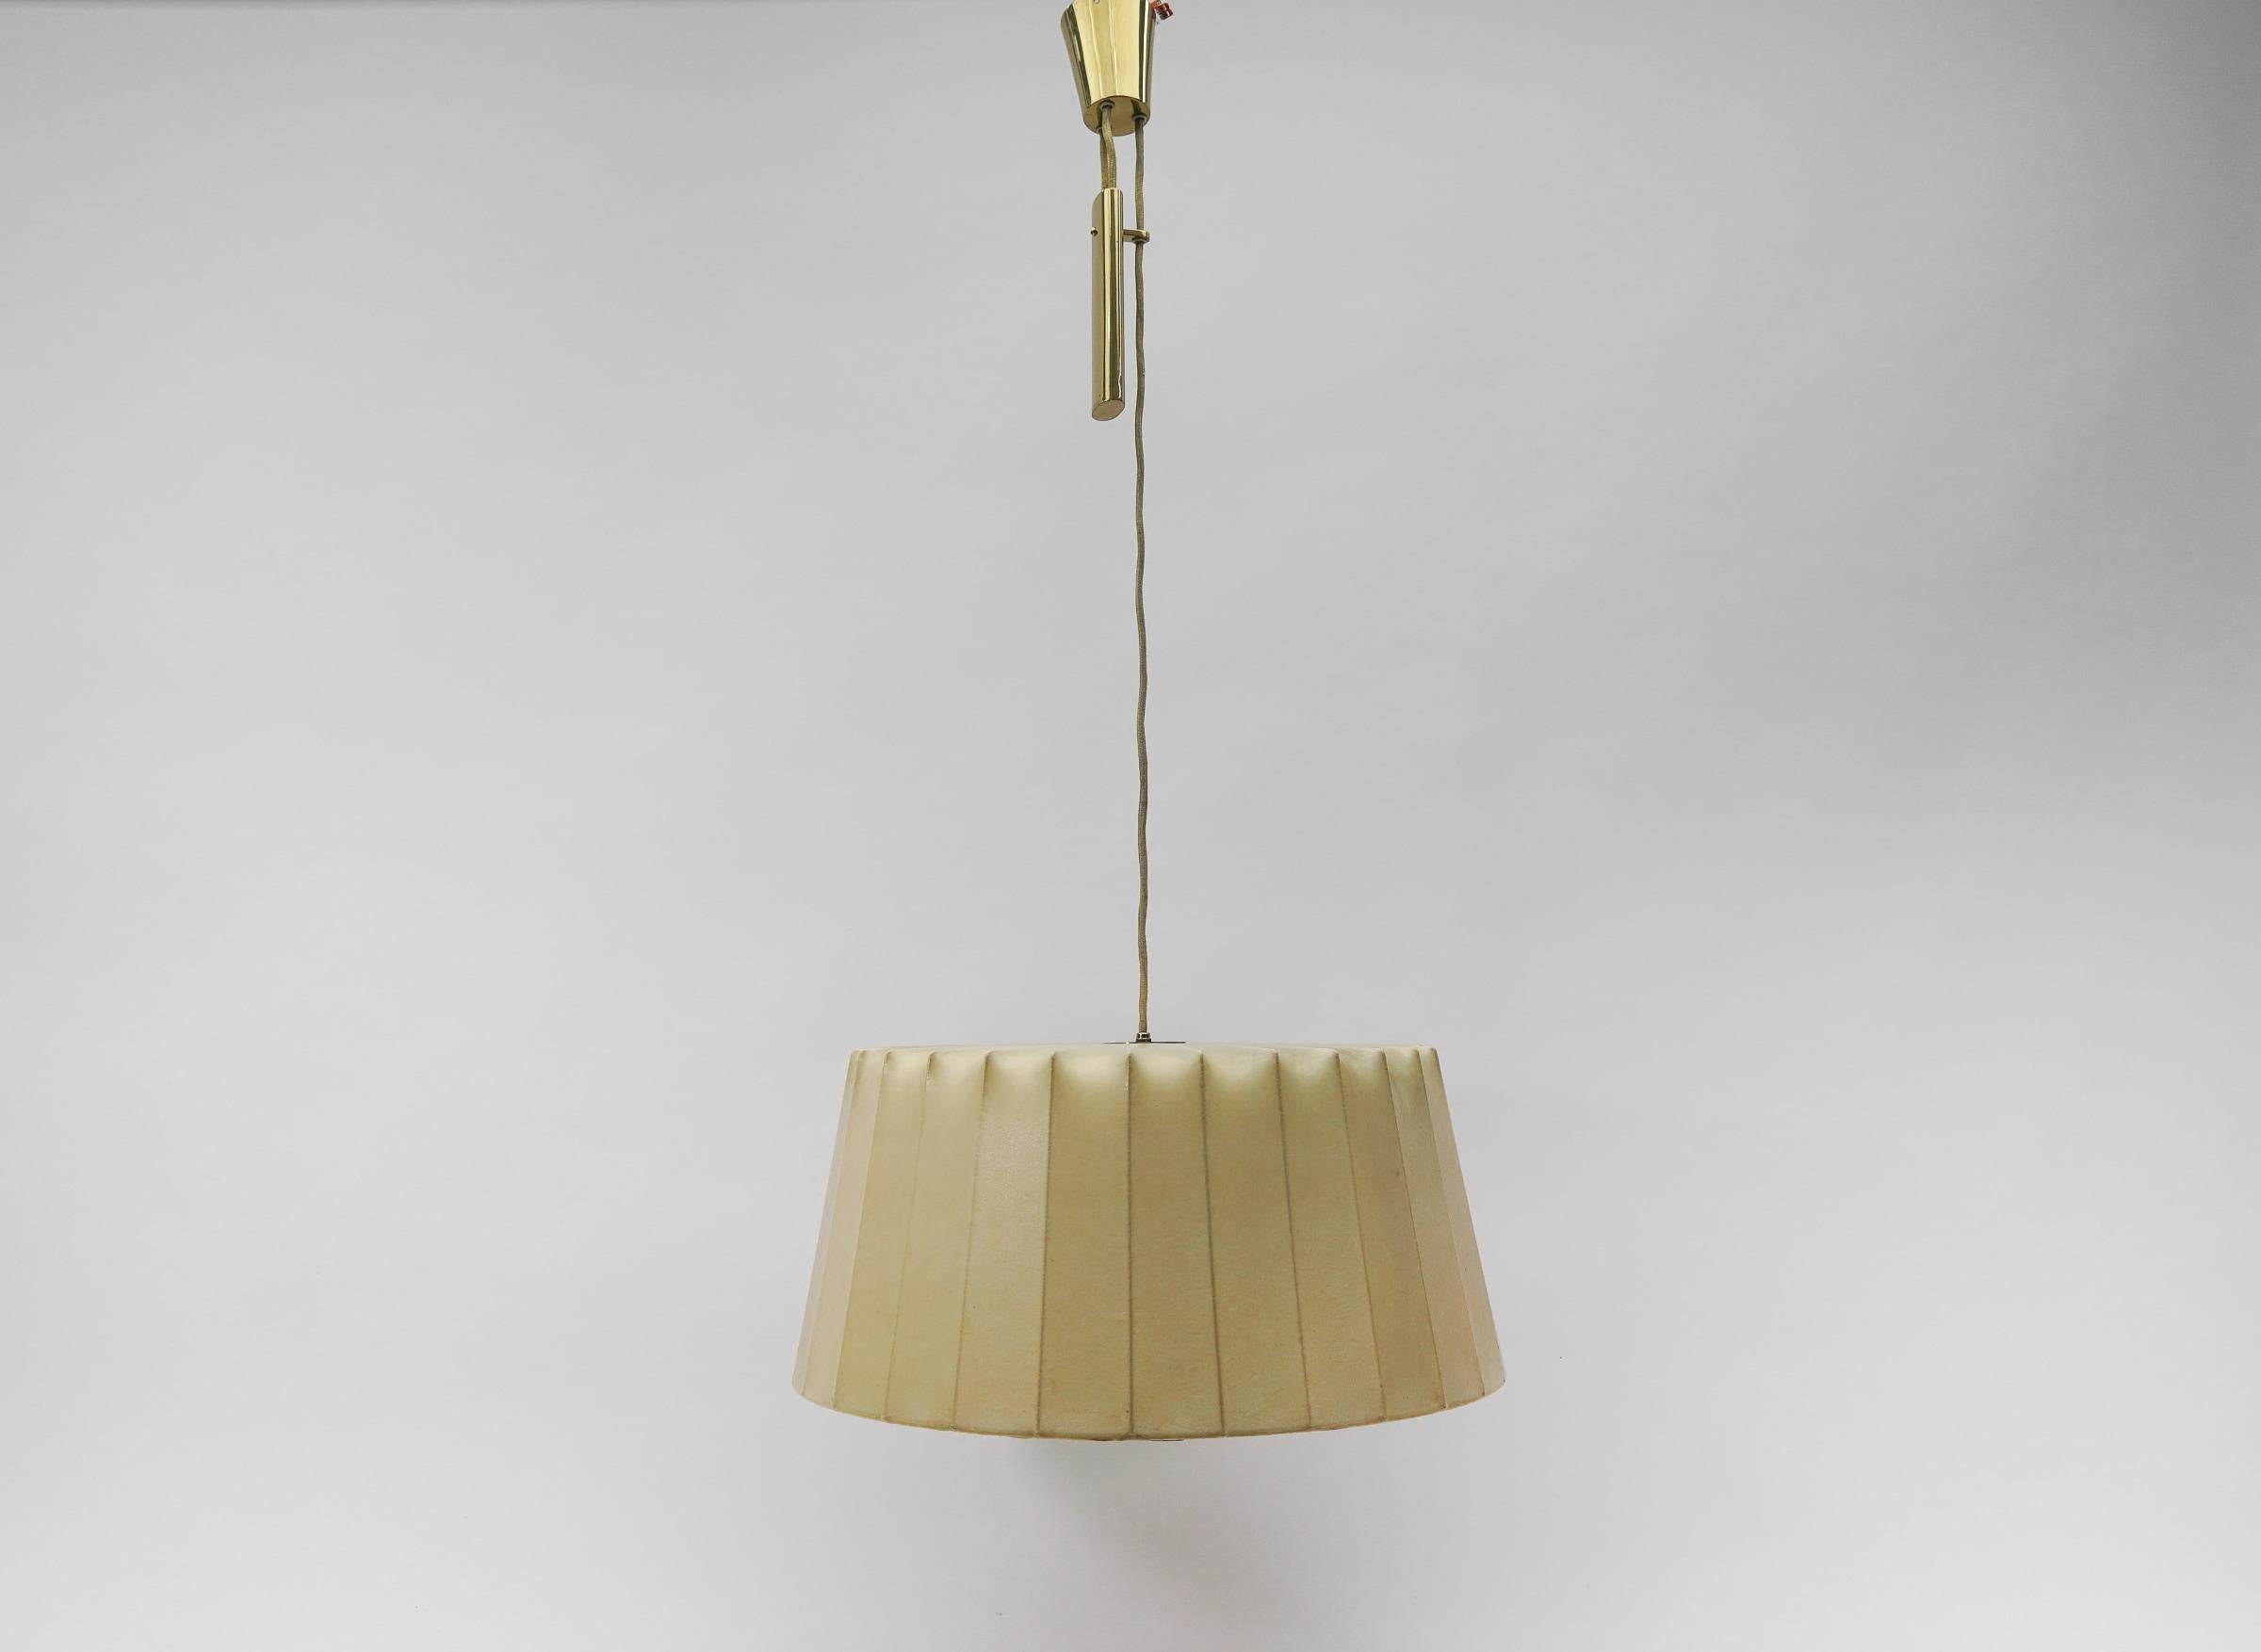 Brass Lovely Cocoon Counterweight Hanging Lamp by Münchener Werkstätten, 1950s Germany For Sale